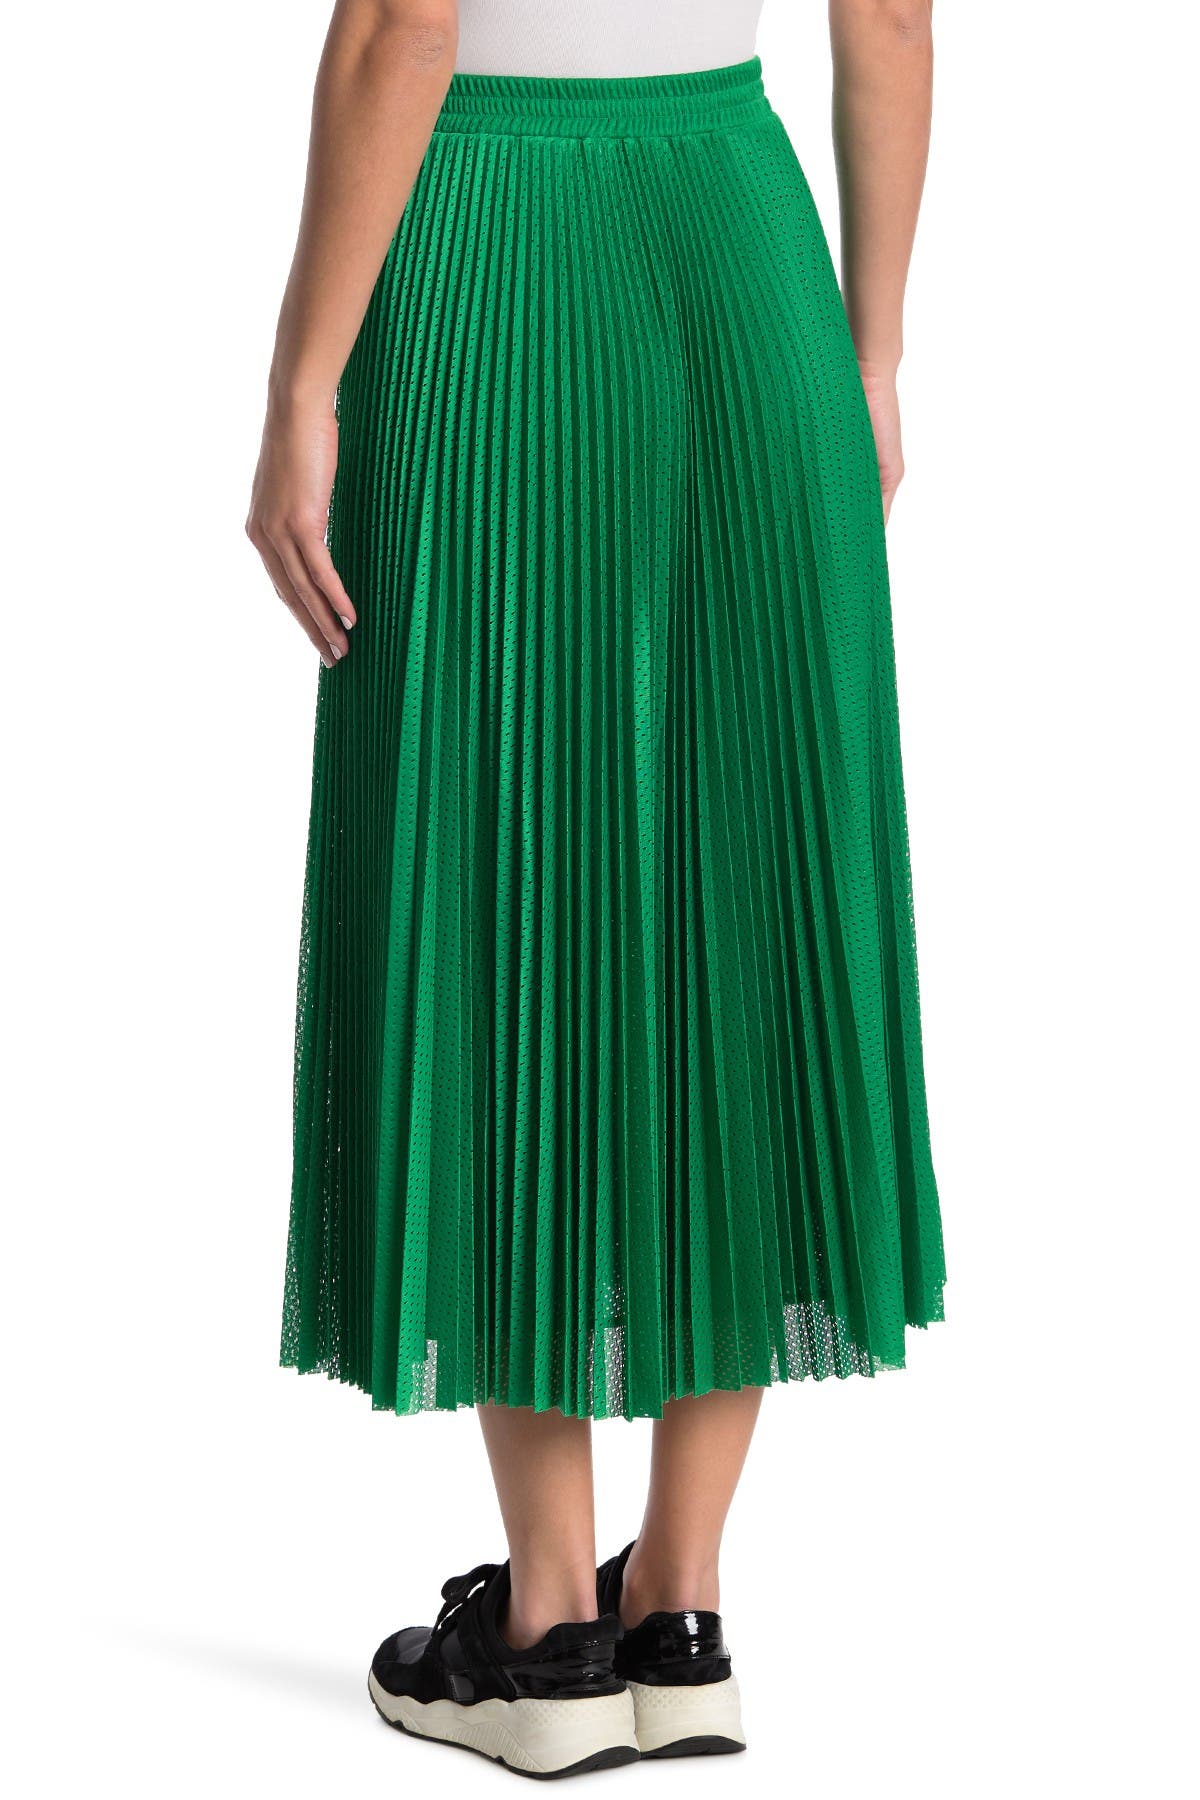 Red Valentino Perforated Pleated Skirt In Verde 635